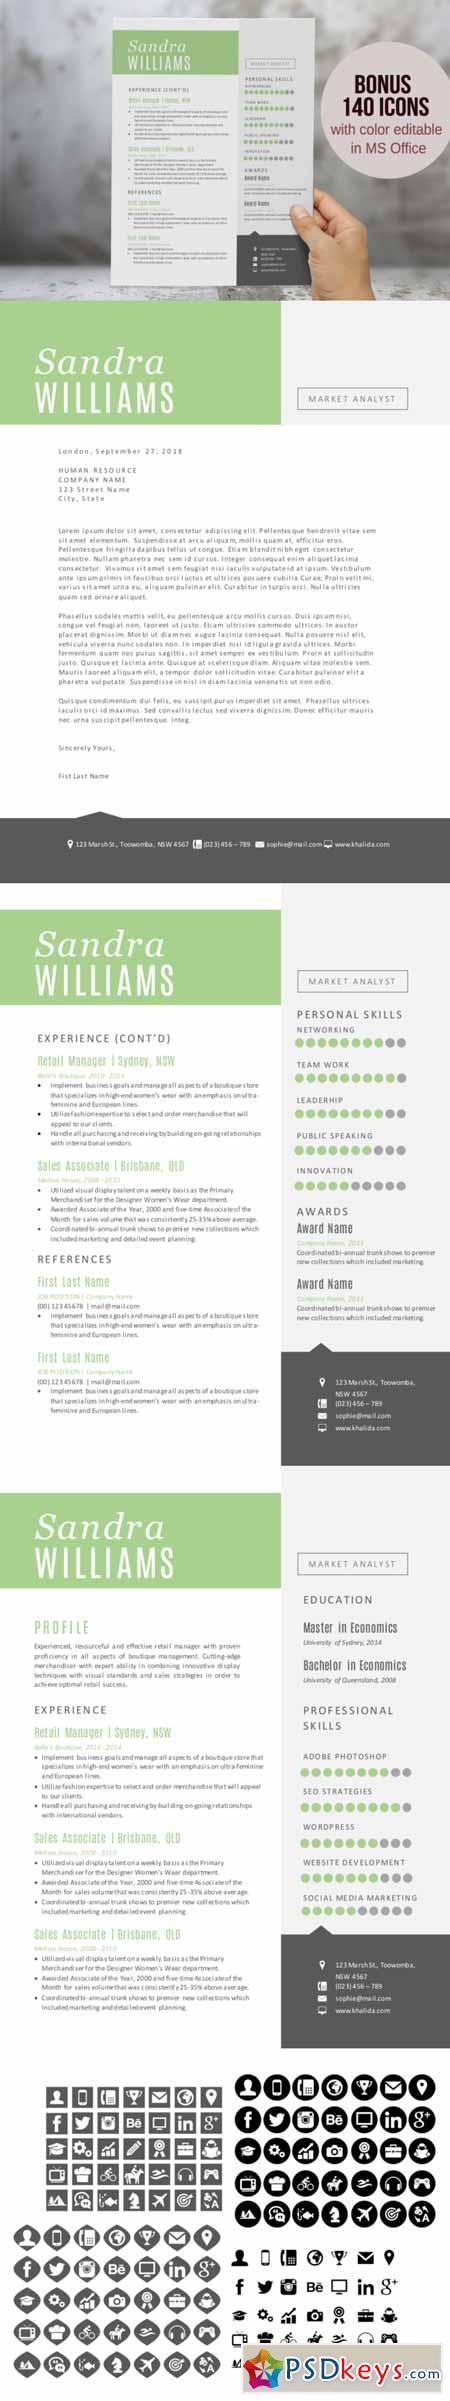 green 2 in 1 word modern resume pack 225561  u00bb free download photoshop vector stock image via